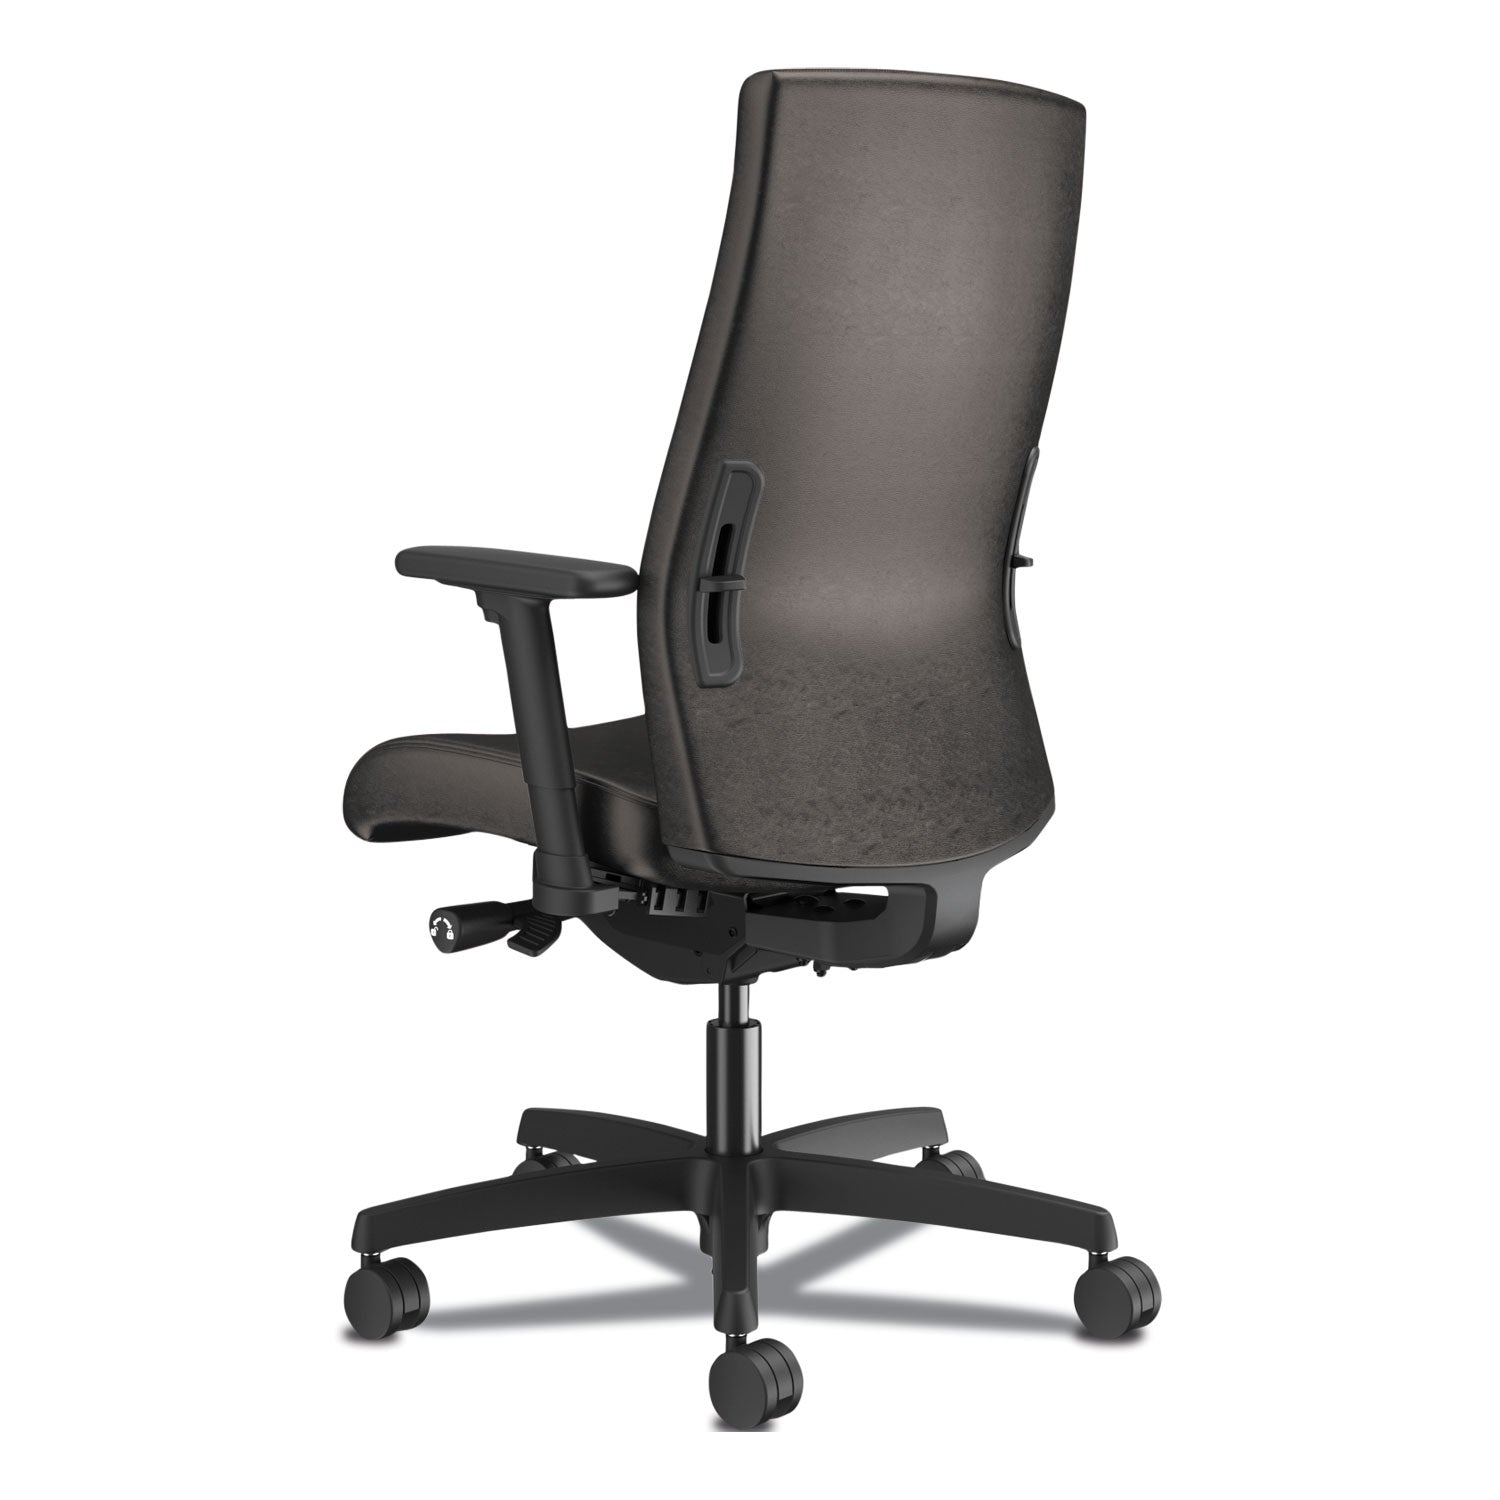 ignition-20-upholstered-mid-back-task-chair-with-lumbar-supports-300-lb-17-to-22-seat-black-vinyl-seat-back-black-base_honi2ul2au10tk - 6